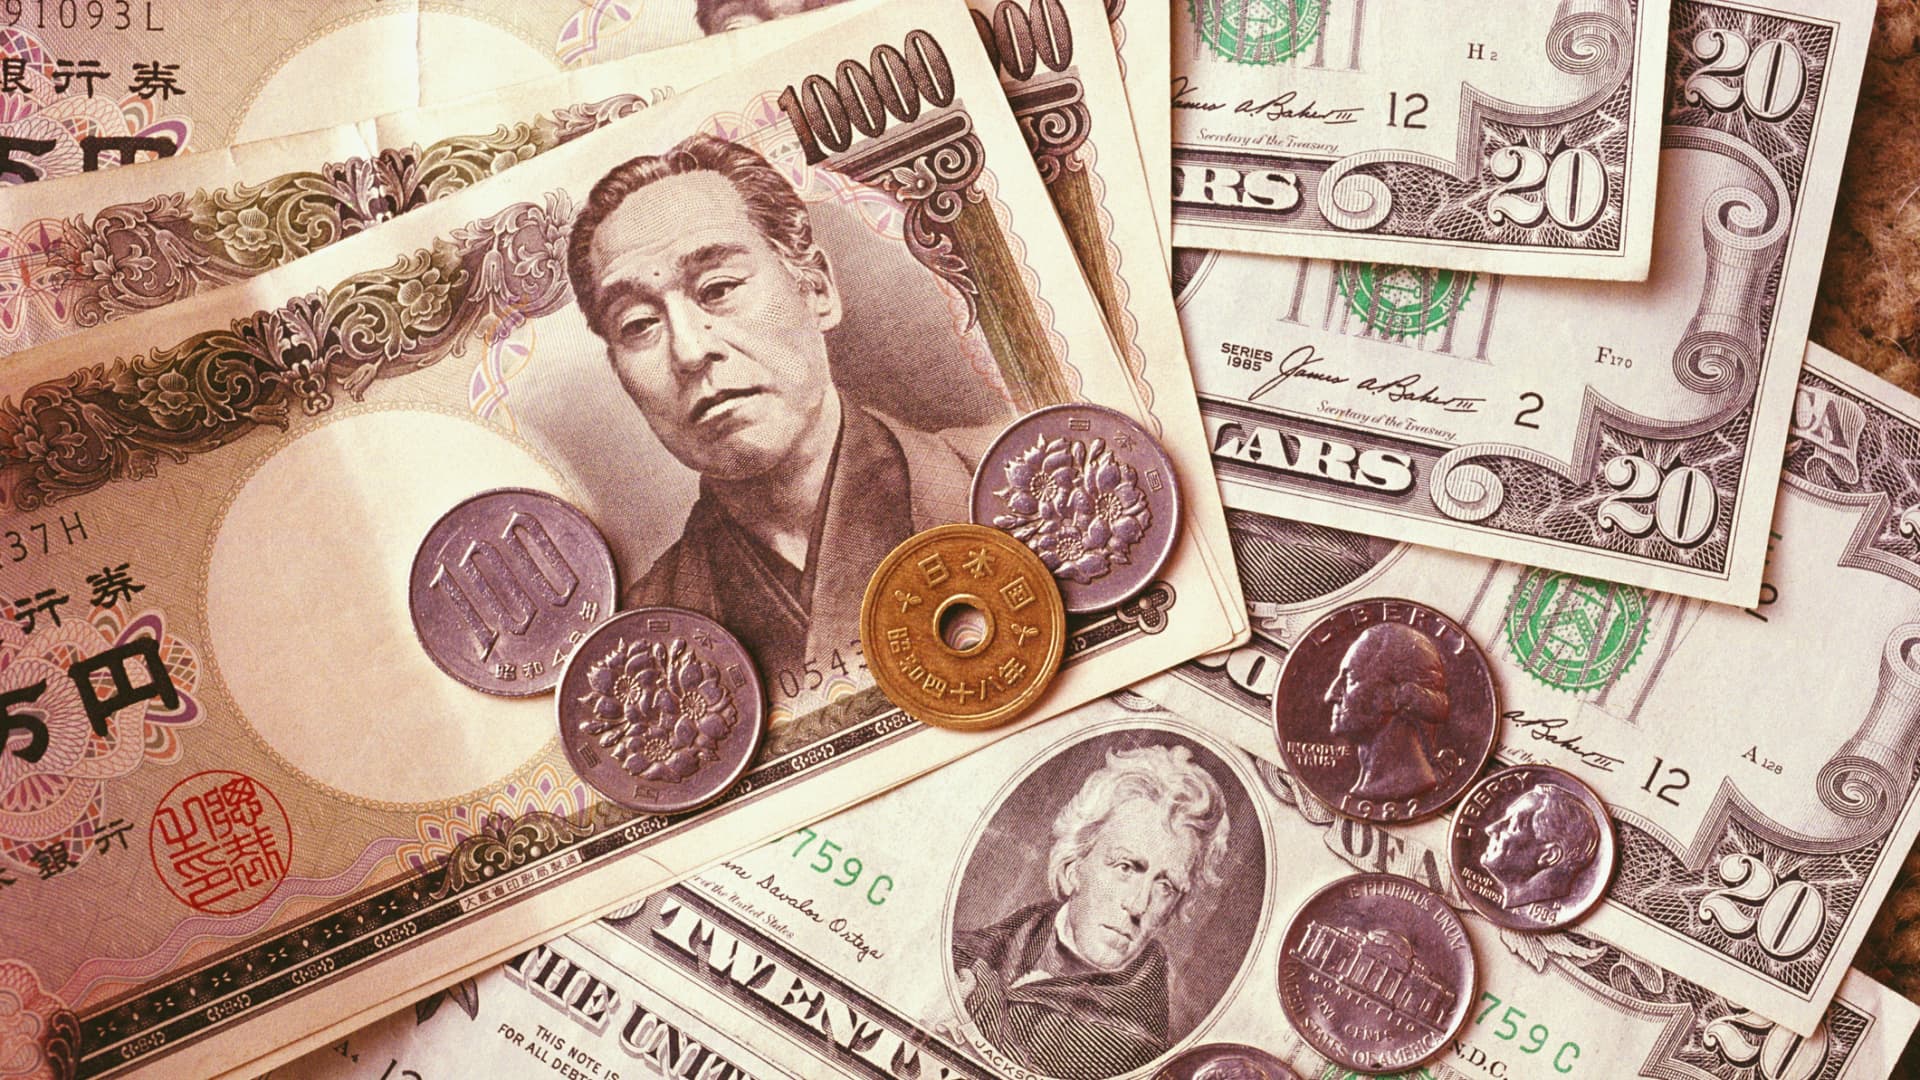 Japan’s yen had a rollercoaster week. Here’s what happened